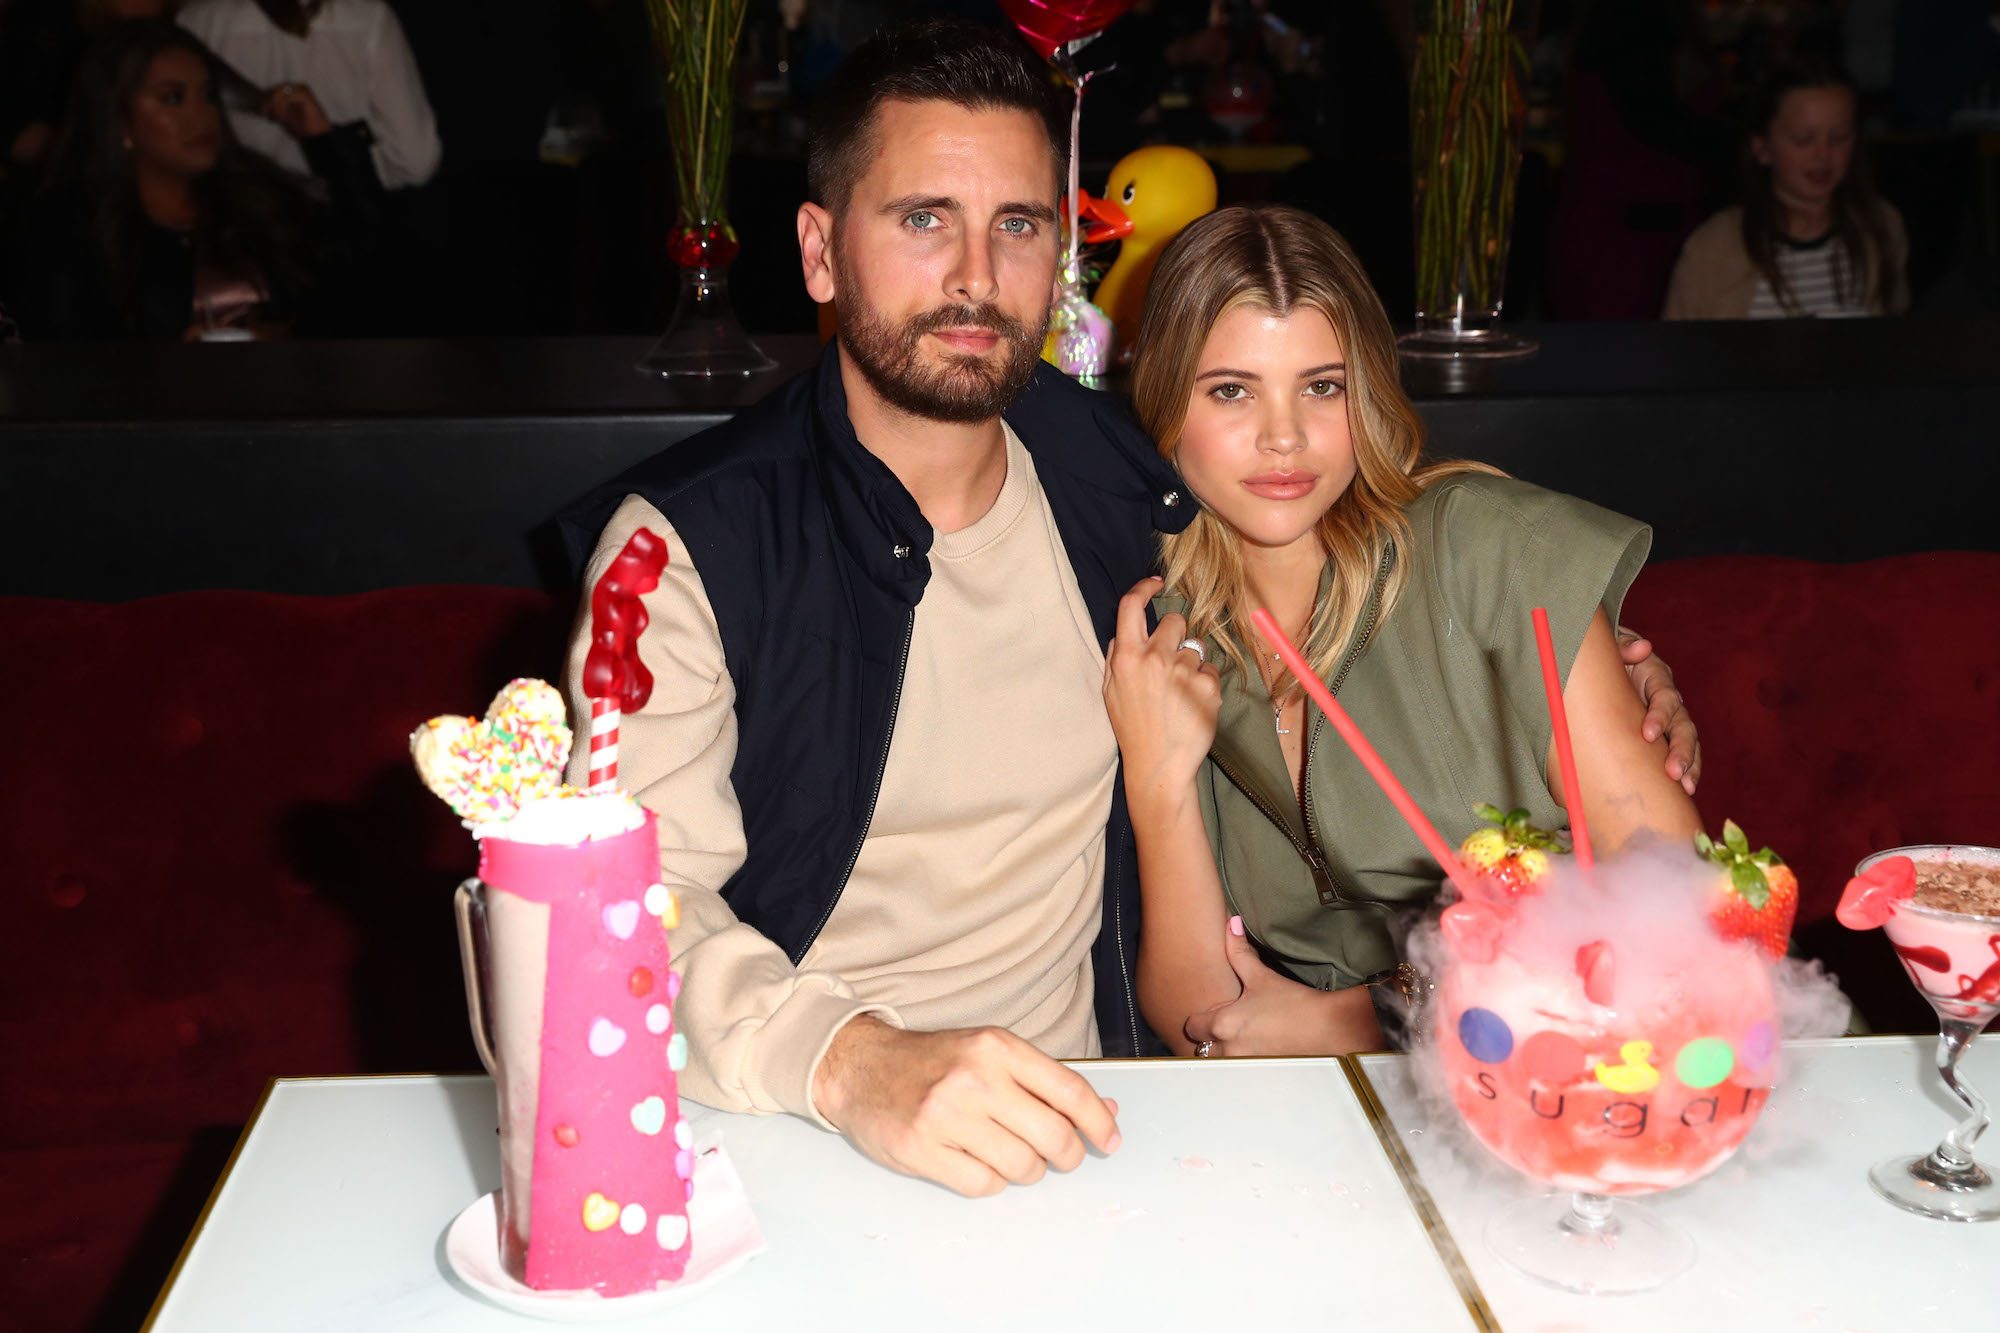 Scott Disick and Sofia Richie attending The Sugar Factory's San Diego opening in 2019